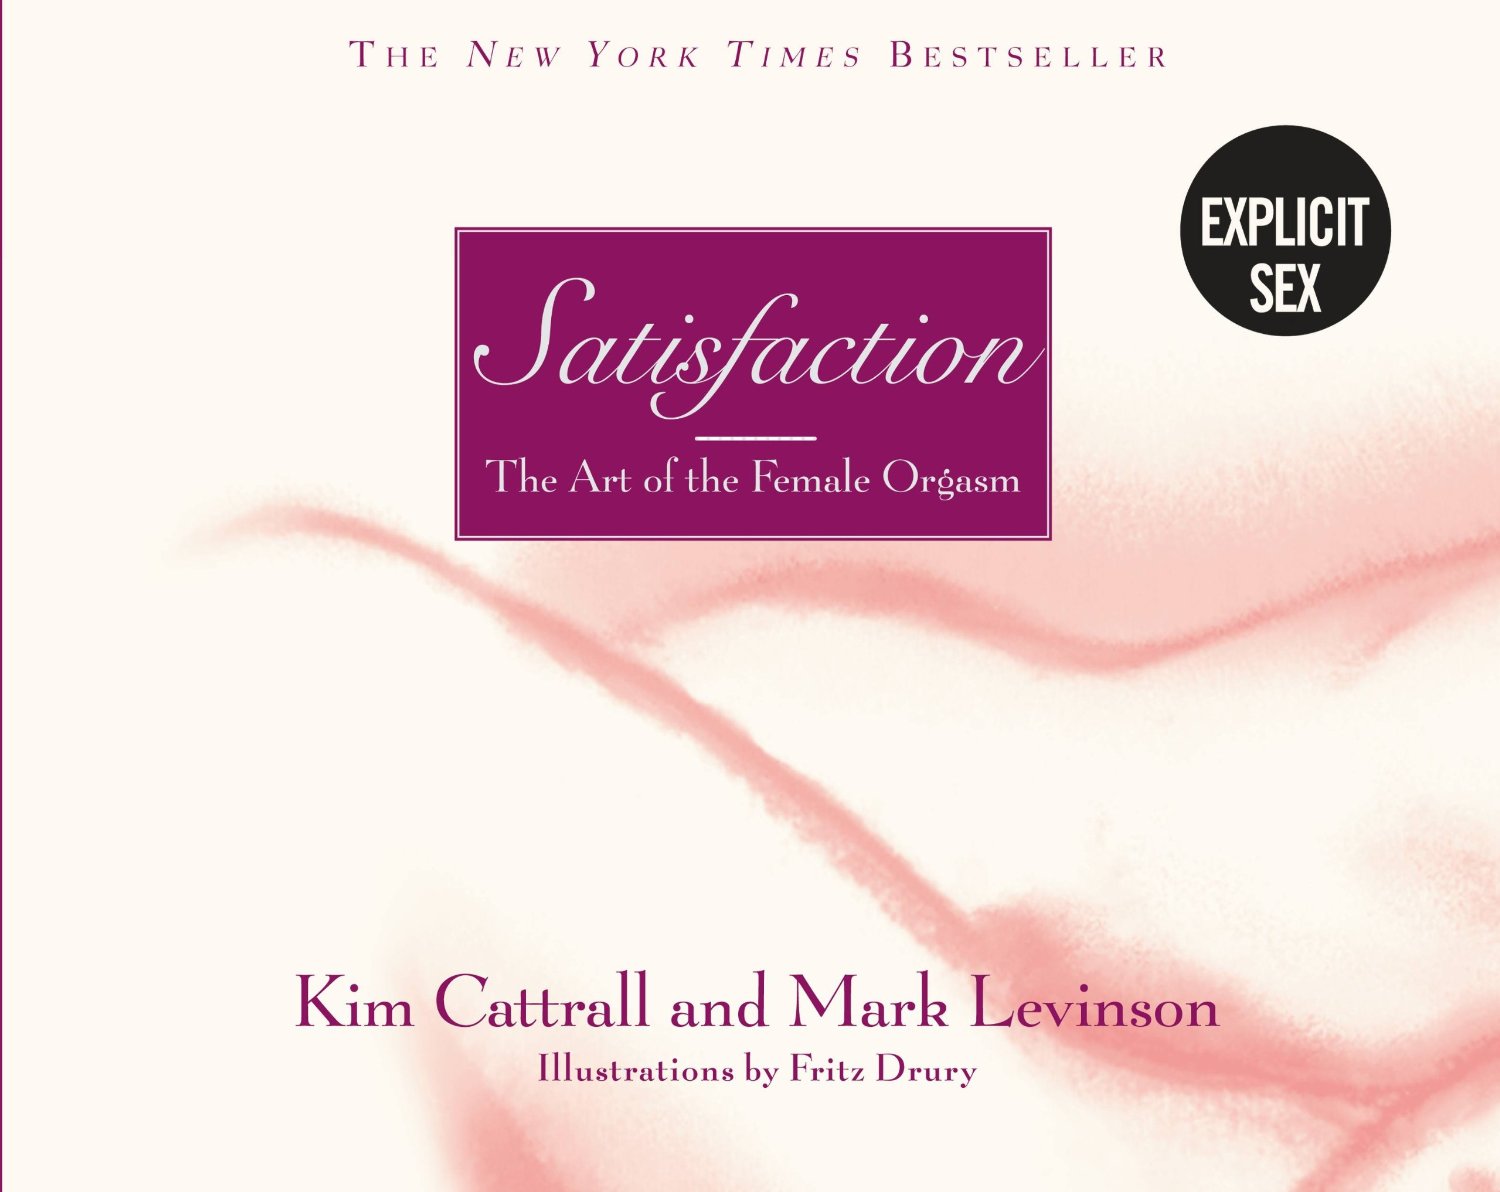 Review: "Satisfaction: The Art of the Female Orgasm", by Kim Cattrall and Mark Levinson 10